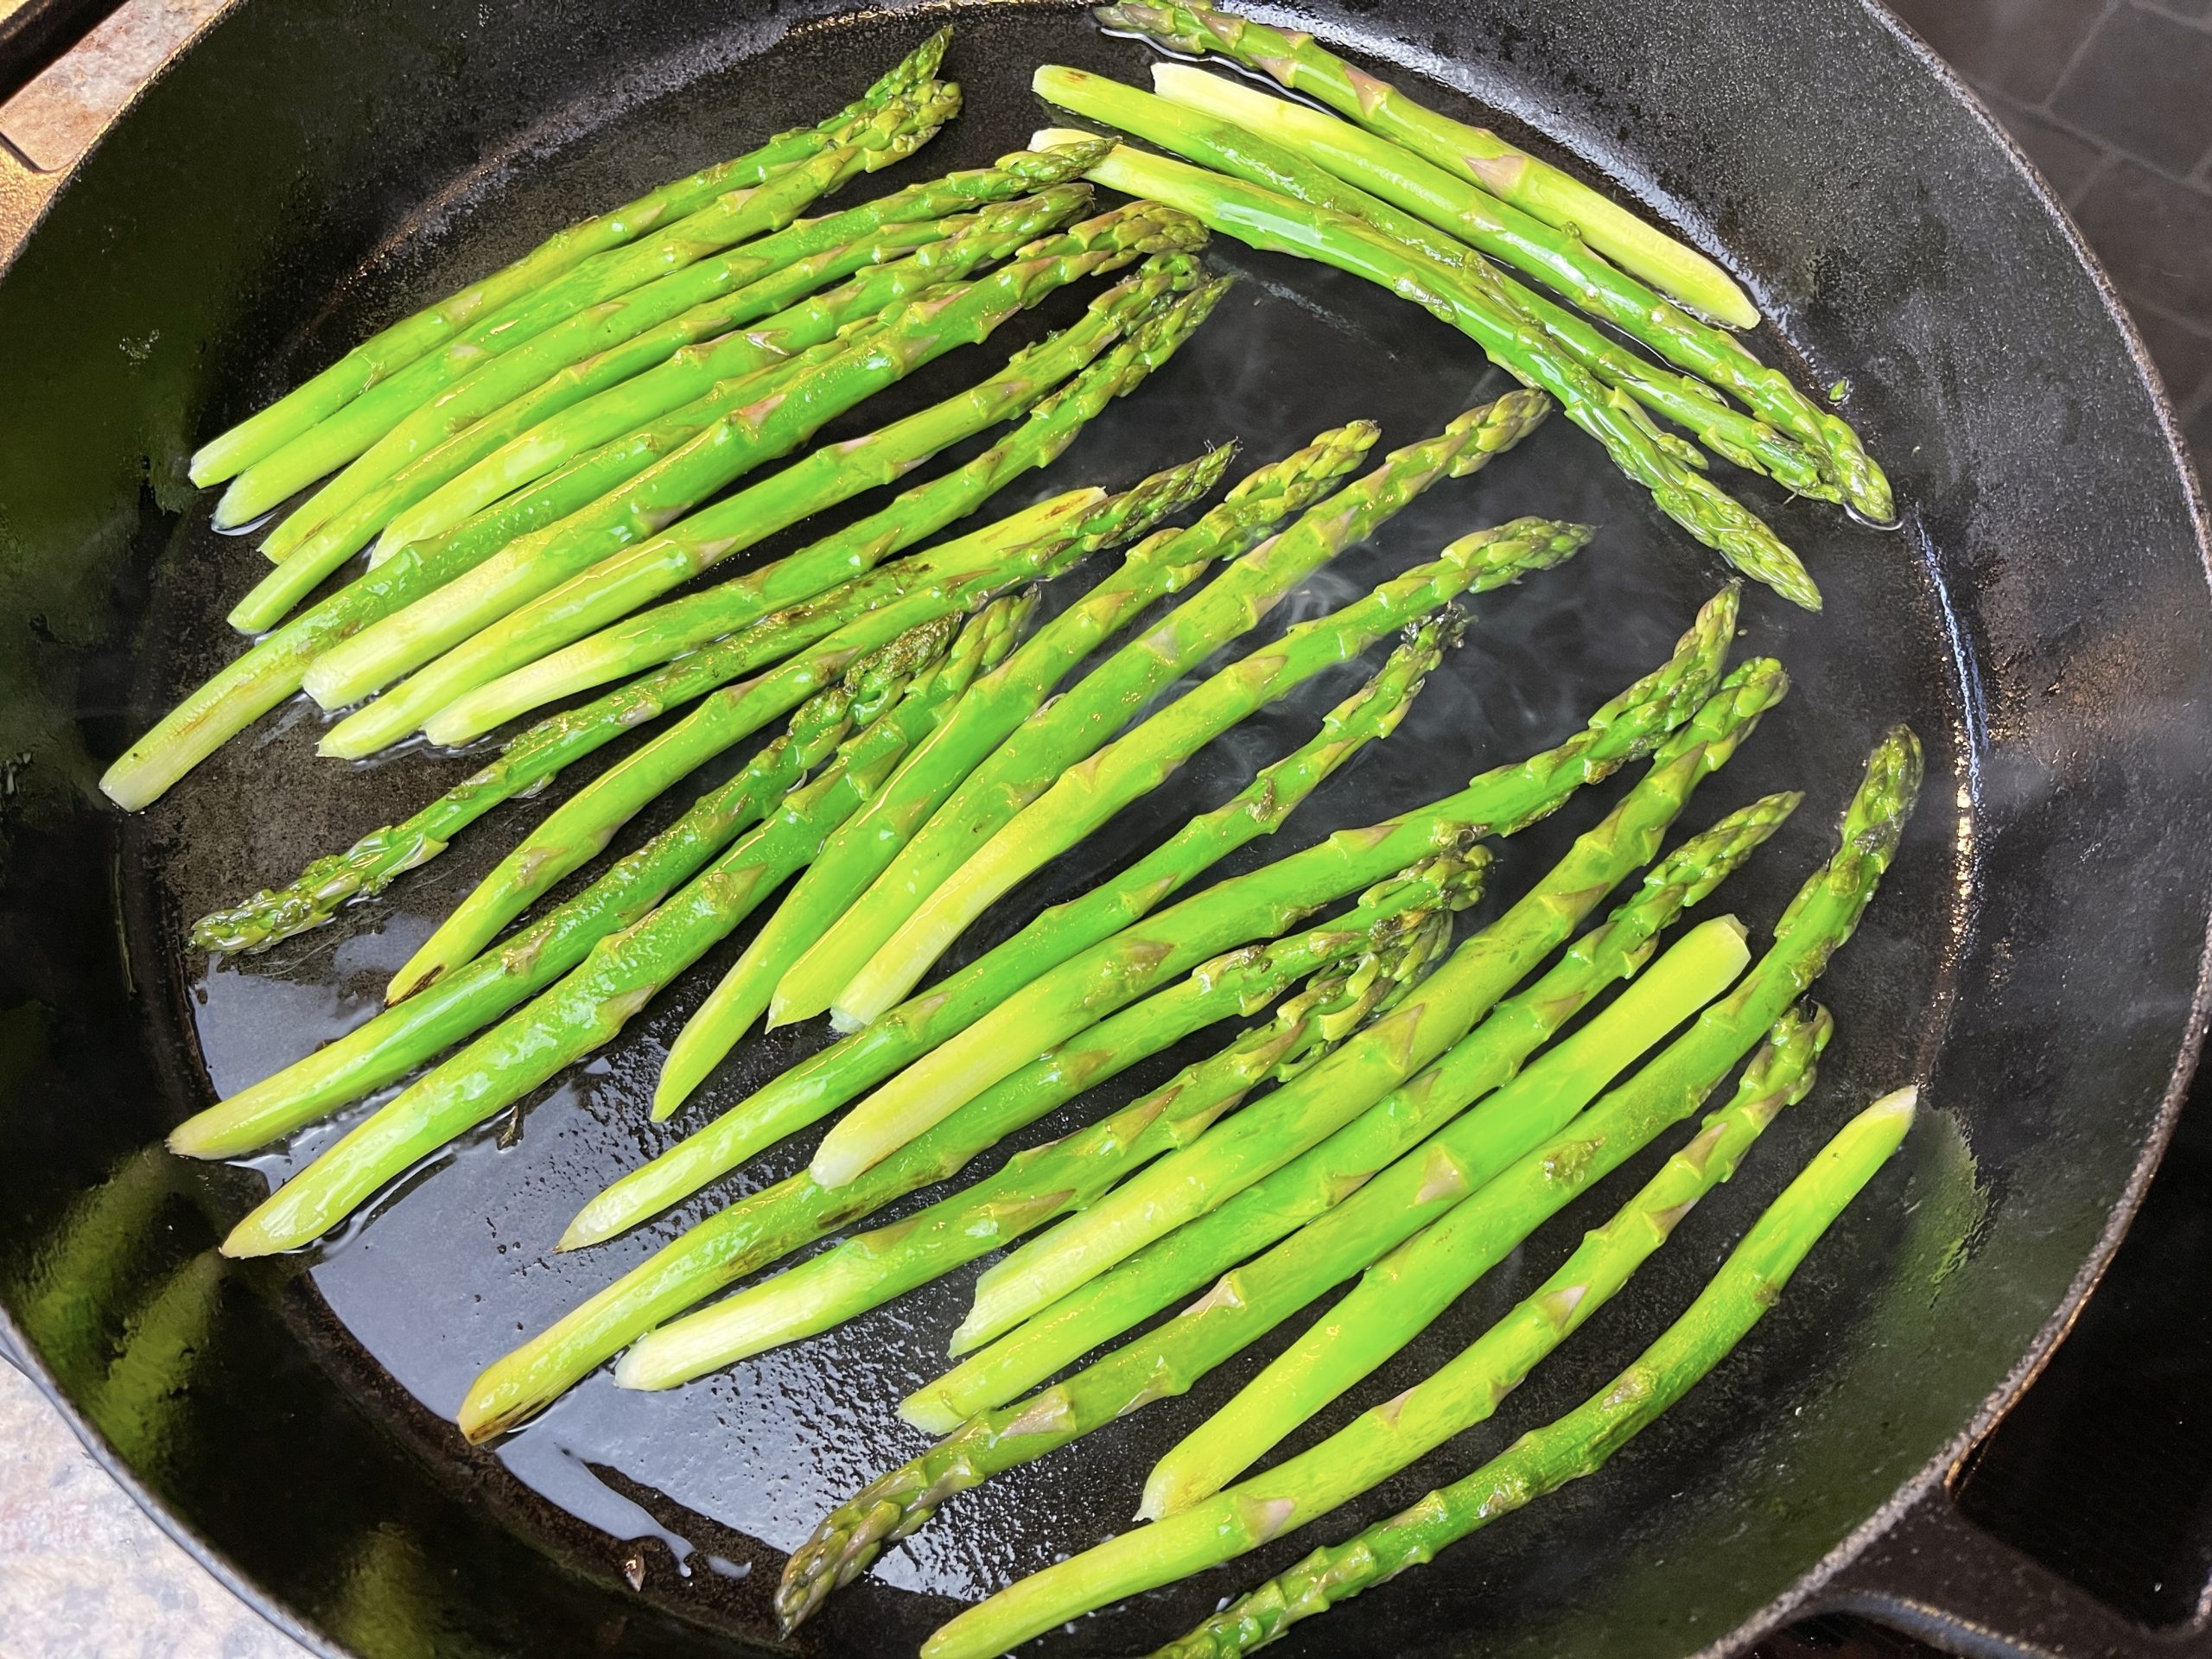 Heat one tablespoon oil in a large nonstick pan over medium-high heat. Cook asparagus in a single layer, undisturbed, until slightly charred underneath, about 2 minutes. 